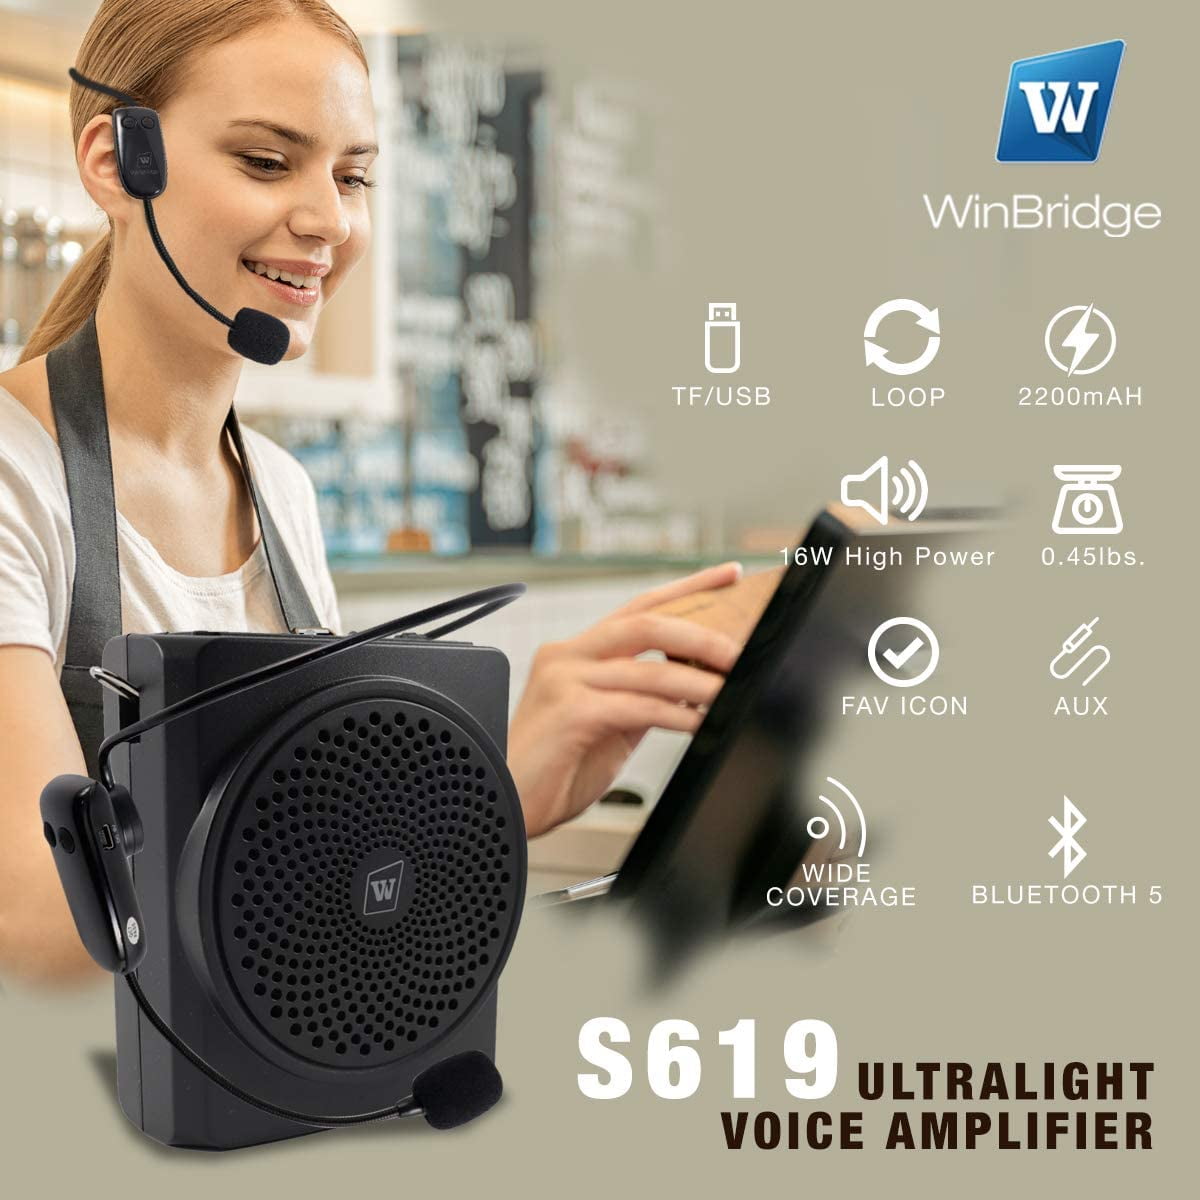 Tour Guides Elderly Etc S619 2020 New WinBridge Voice Amplifier with Wireless Microphone Headset Bluetooth 16W 2200mAh Portable Rechargeable Pa Speaker and Microphone for Teachers Coaches